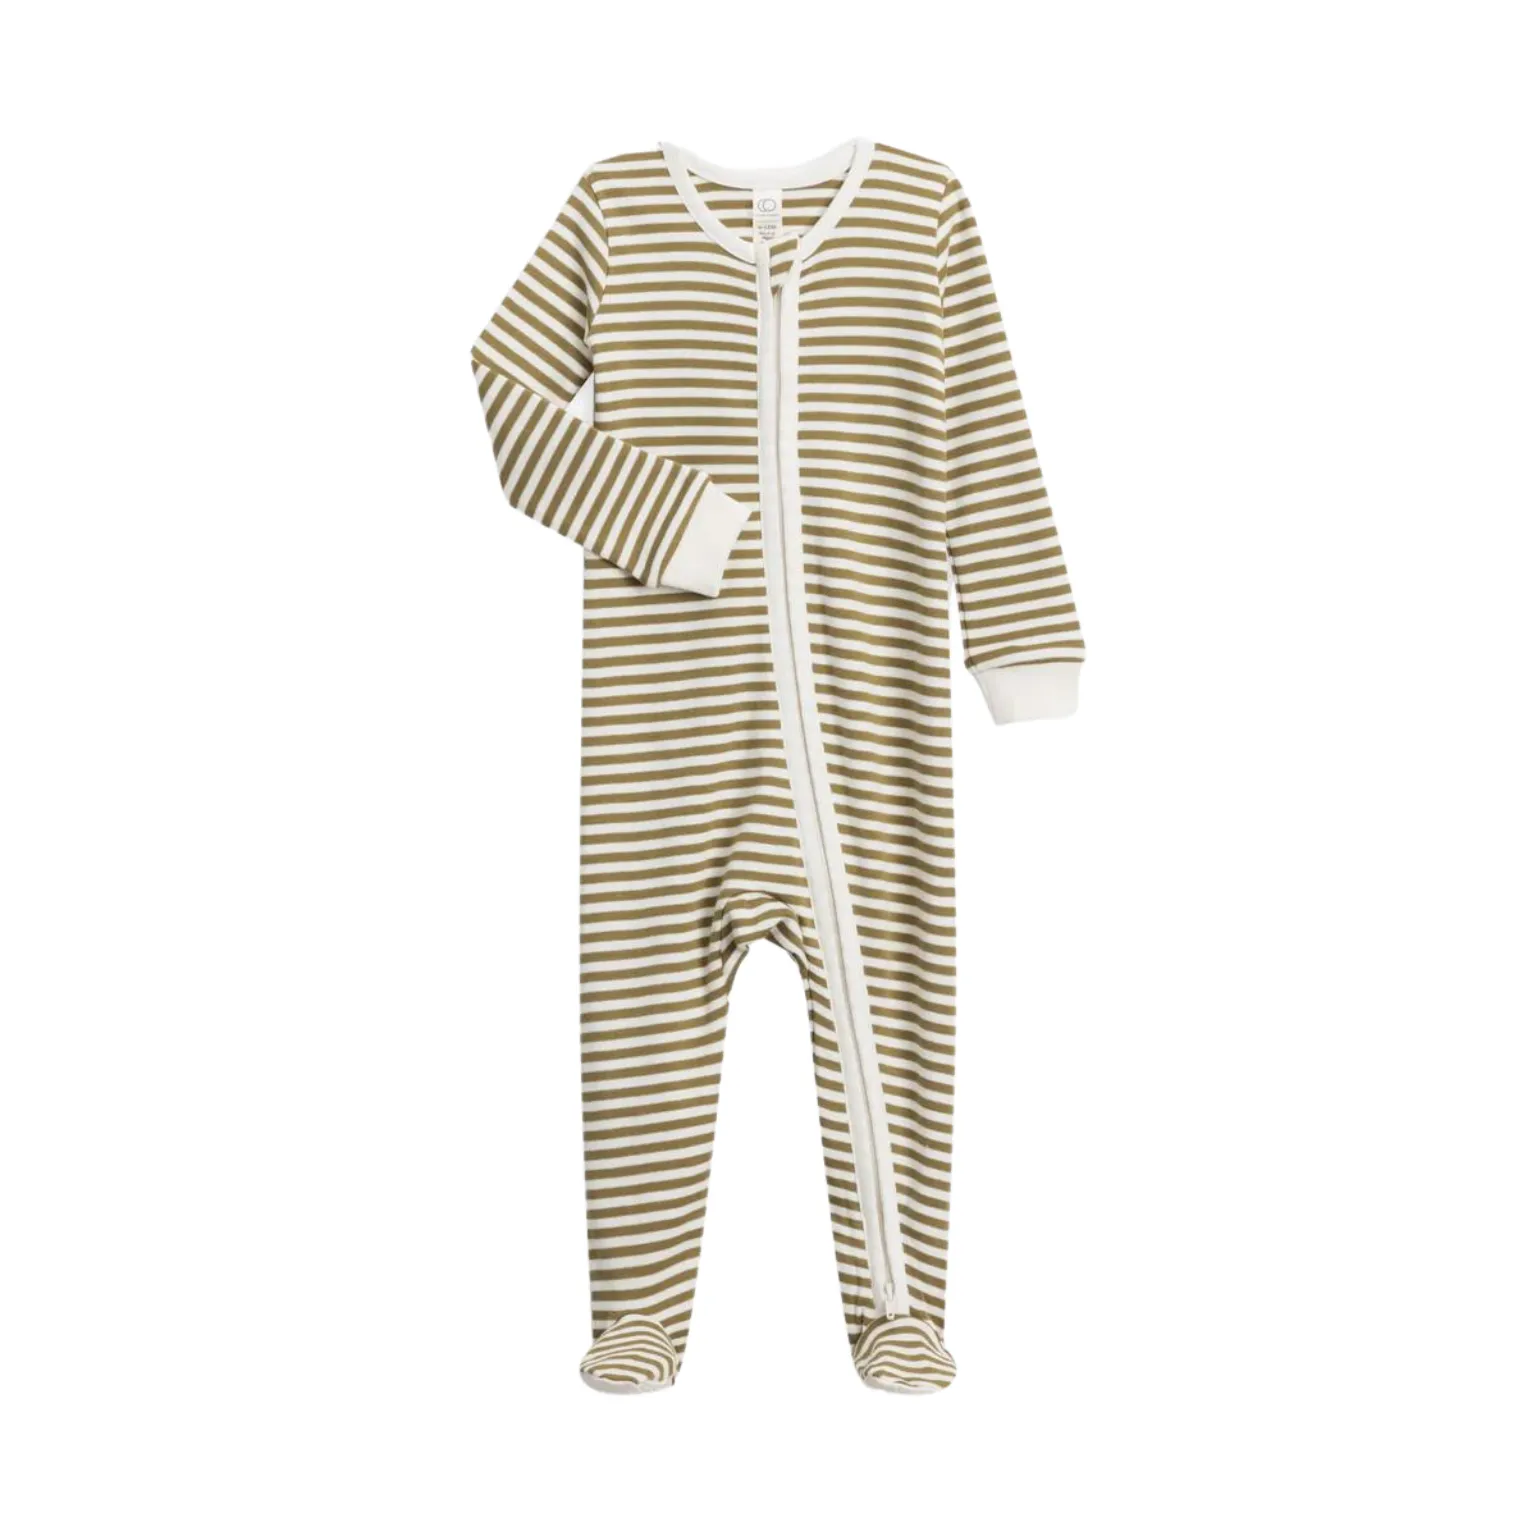 Manufacturing Crew Neck Pajamas with affordable price